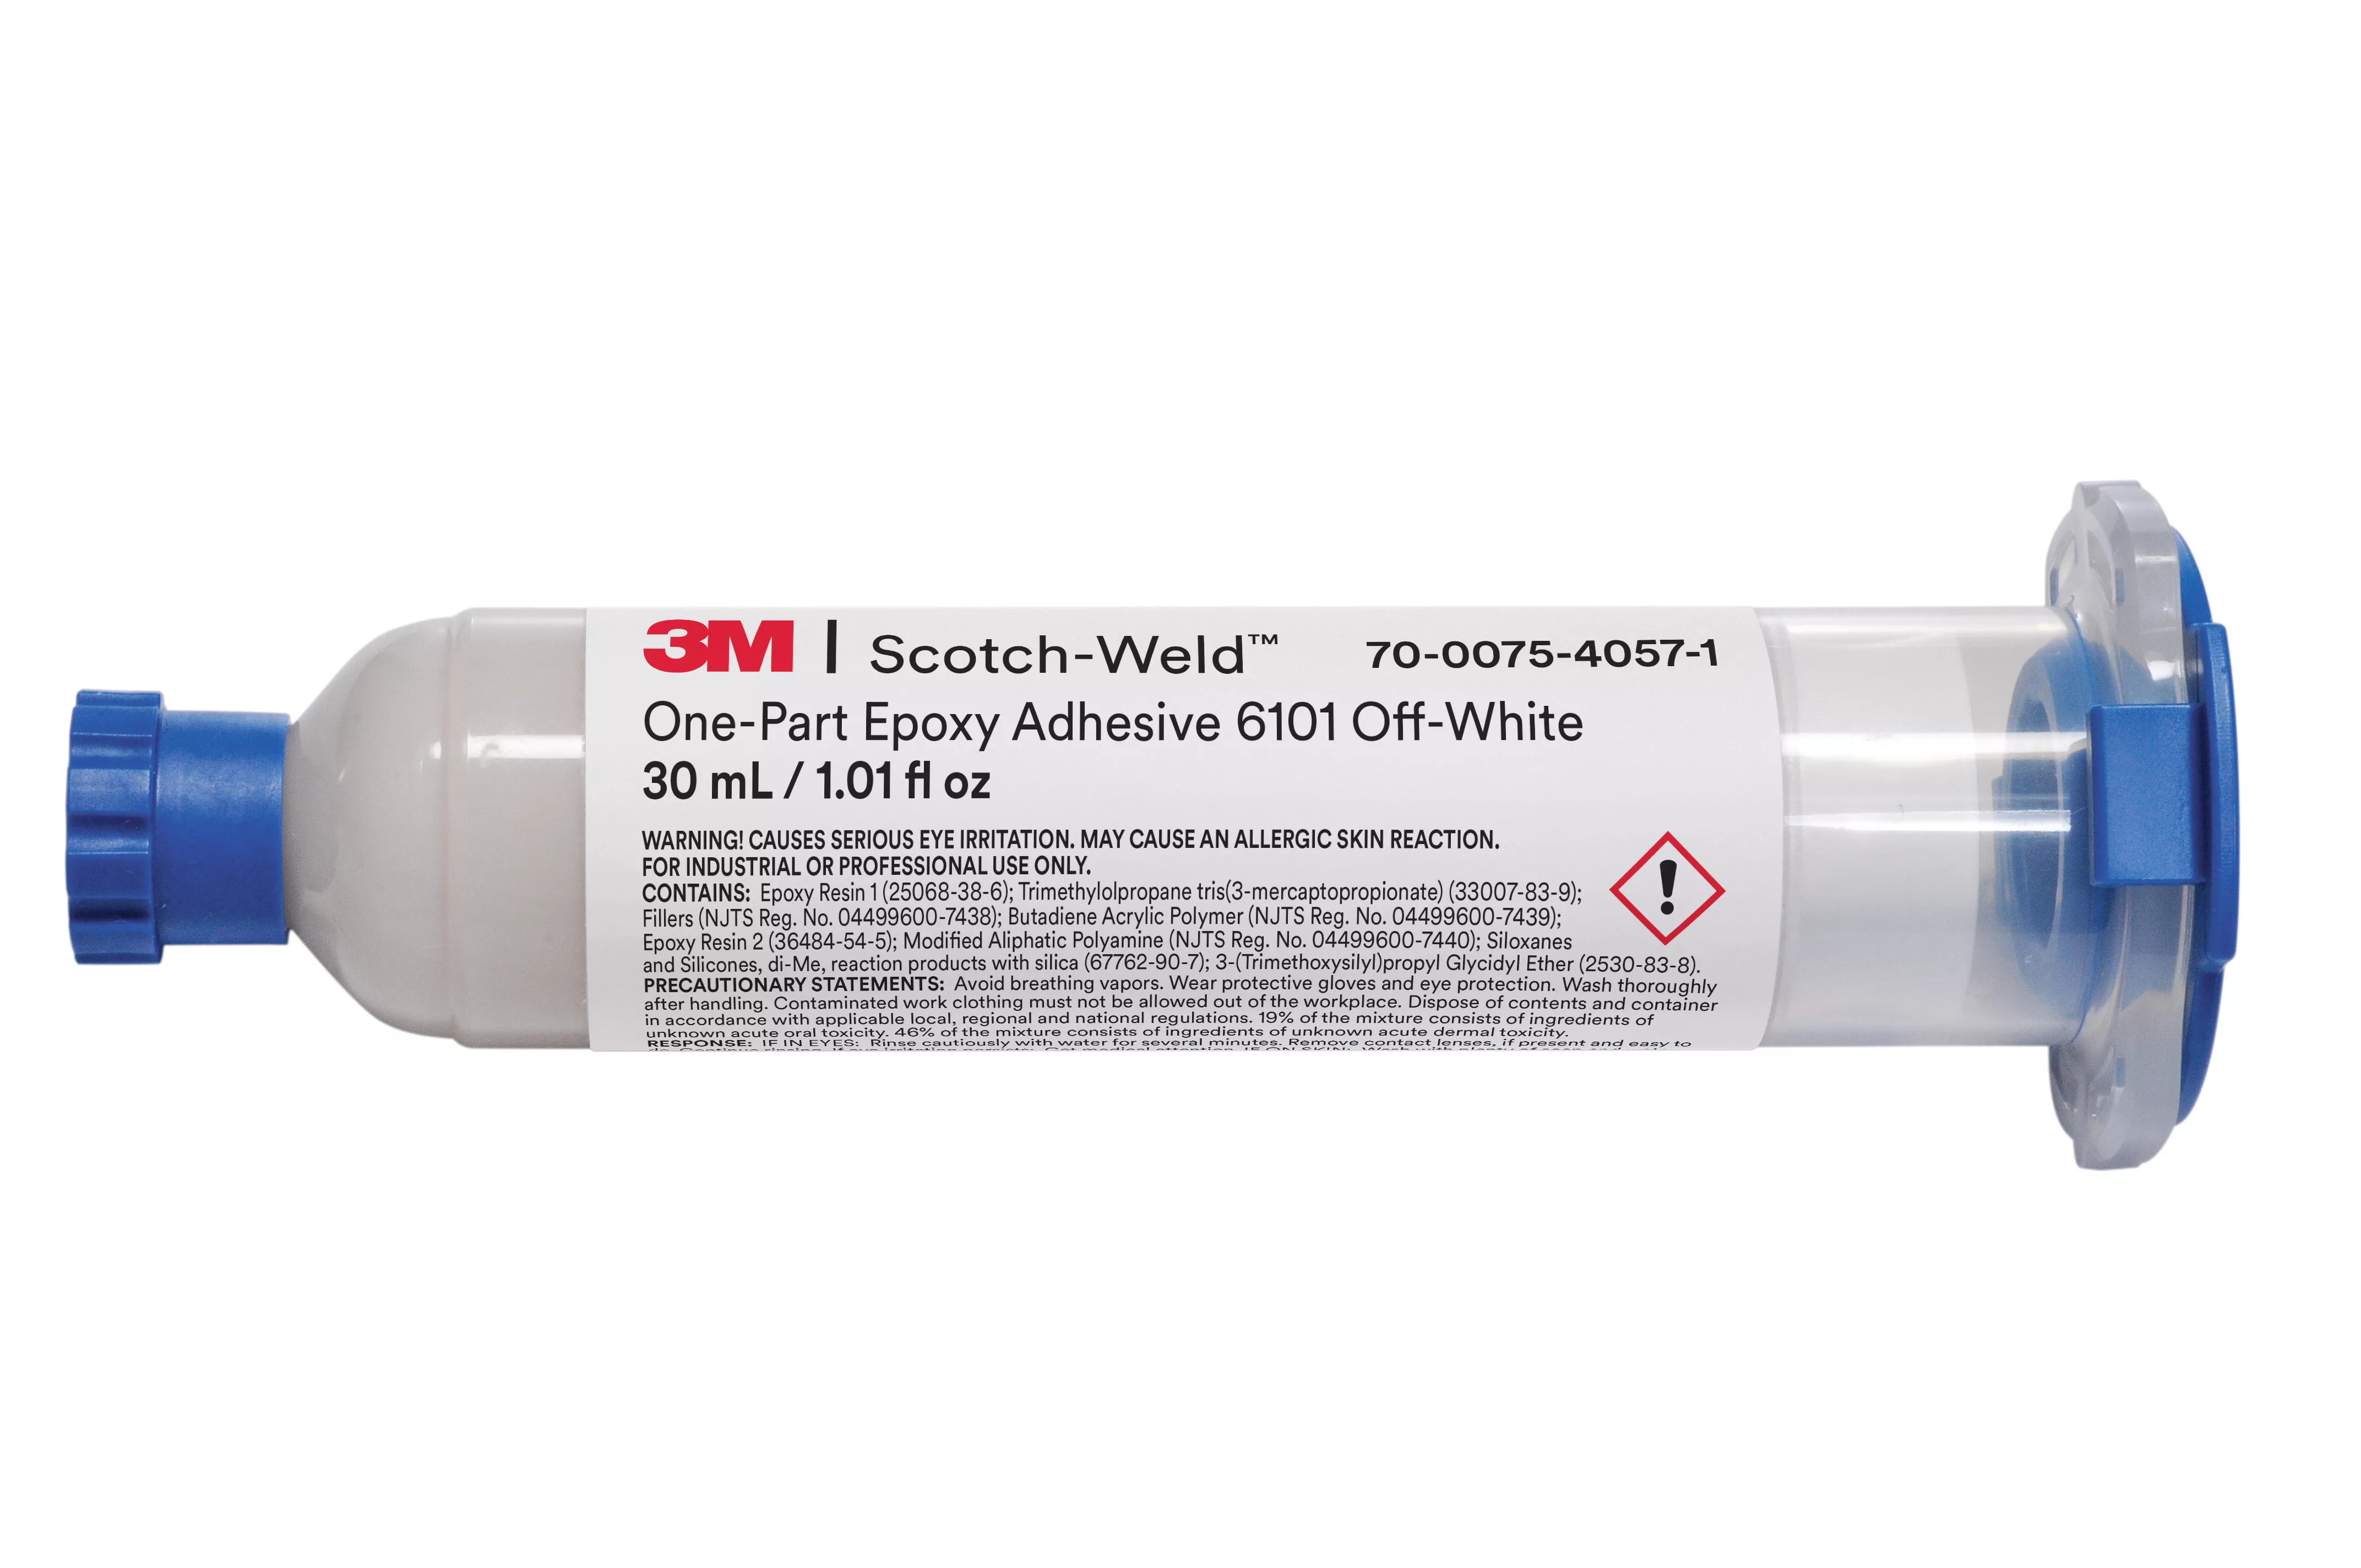 3M™ Scotch-Weld™ One-Part Epoxy Adhesive 6101, Off-White, 30 mL, 20/Case, Restricted